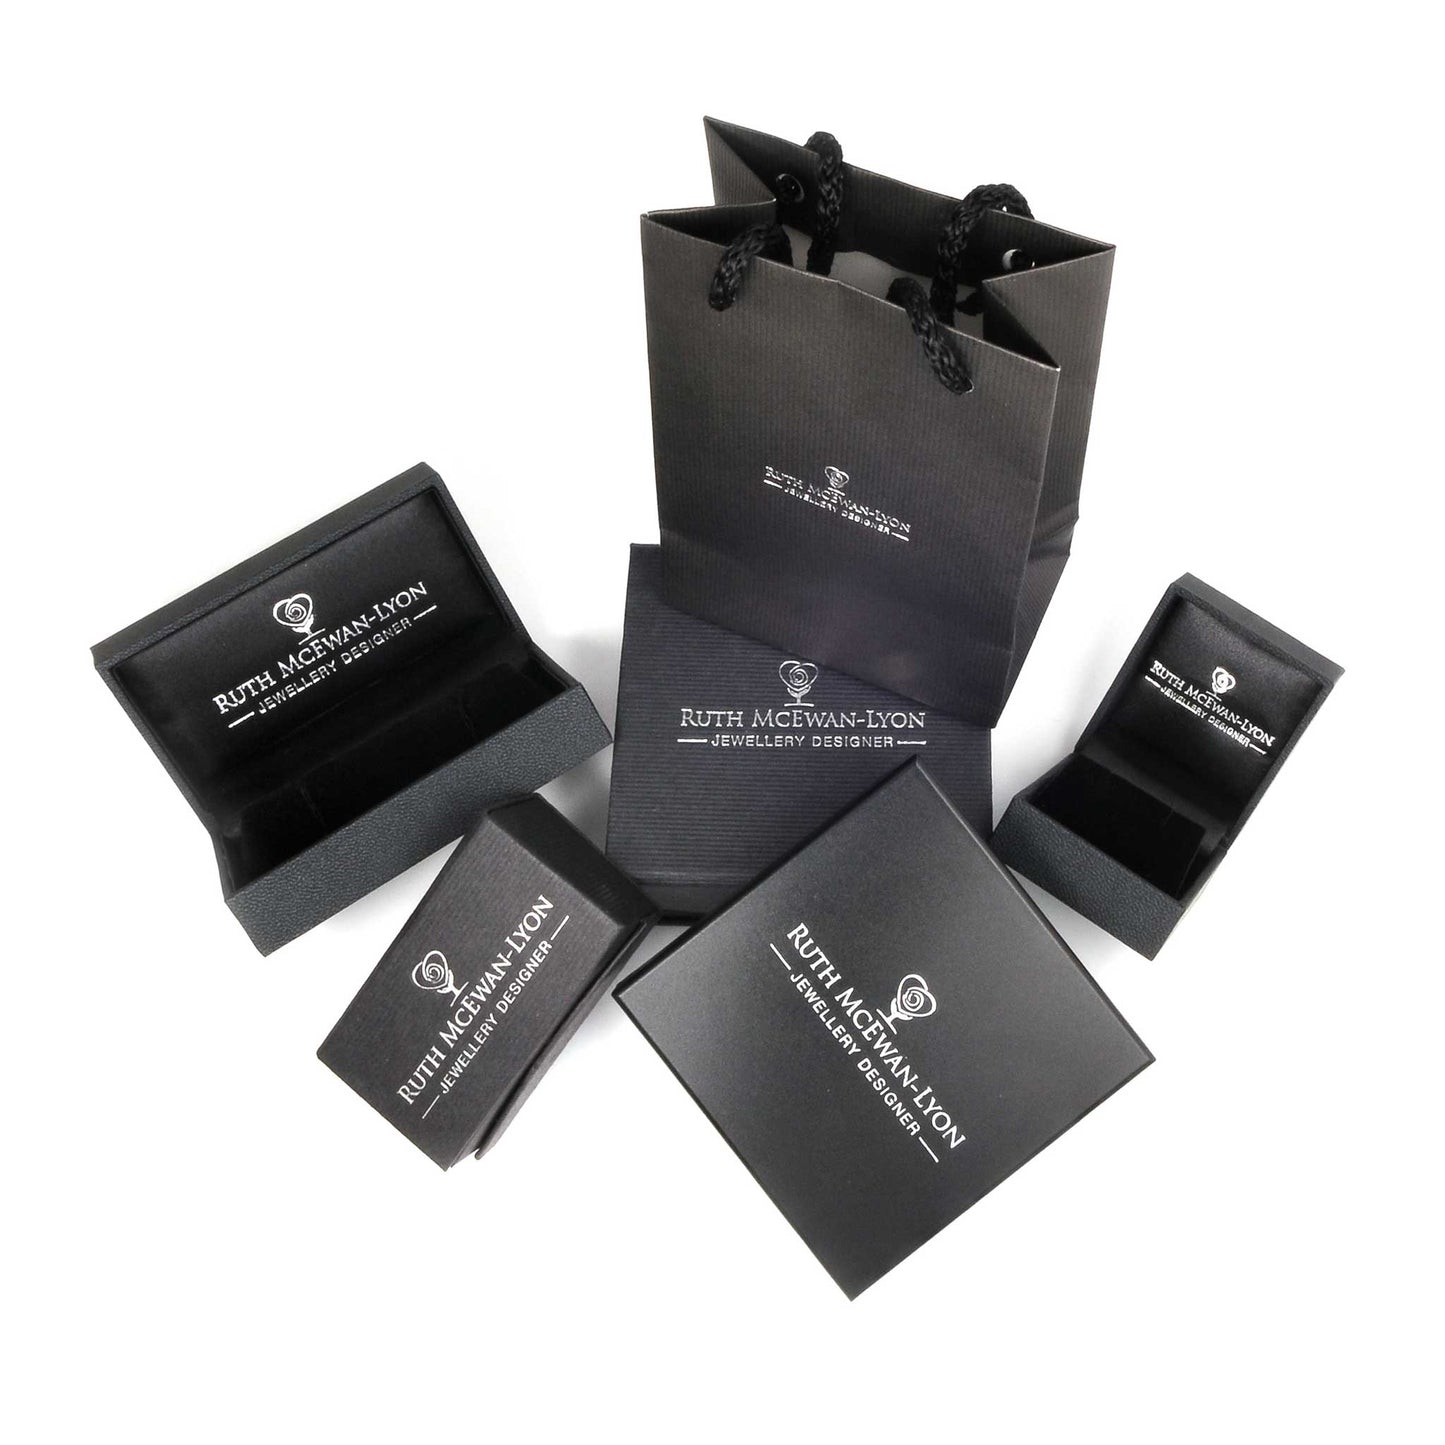 NI Silver jewellery packaging is biodegradable and is a great free additional to your purchase